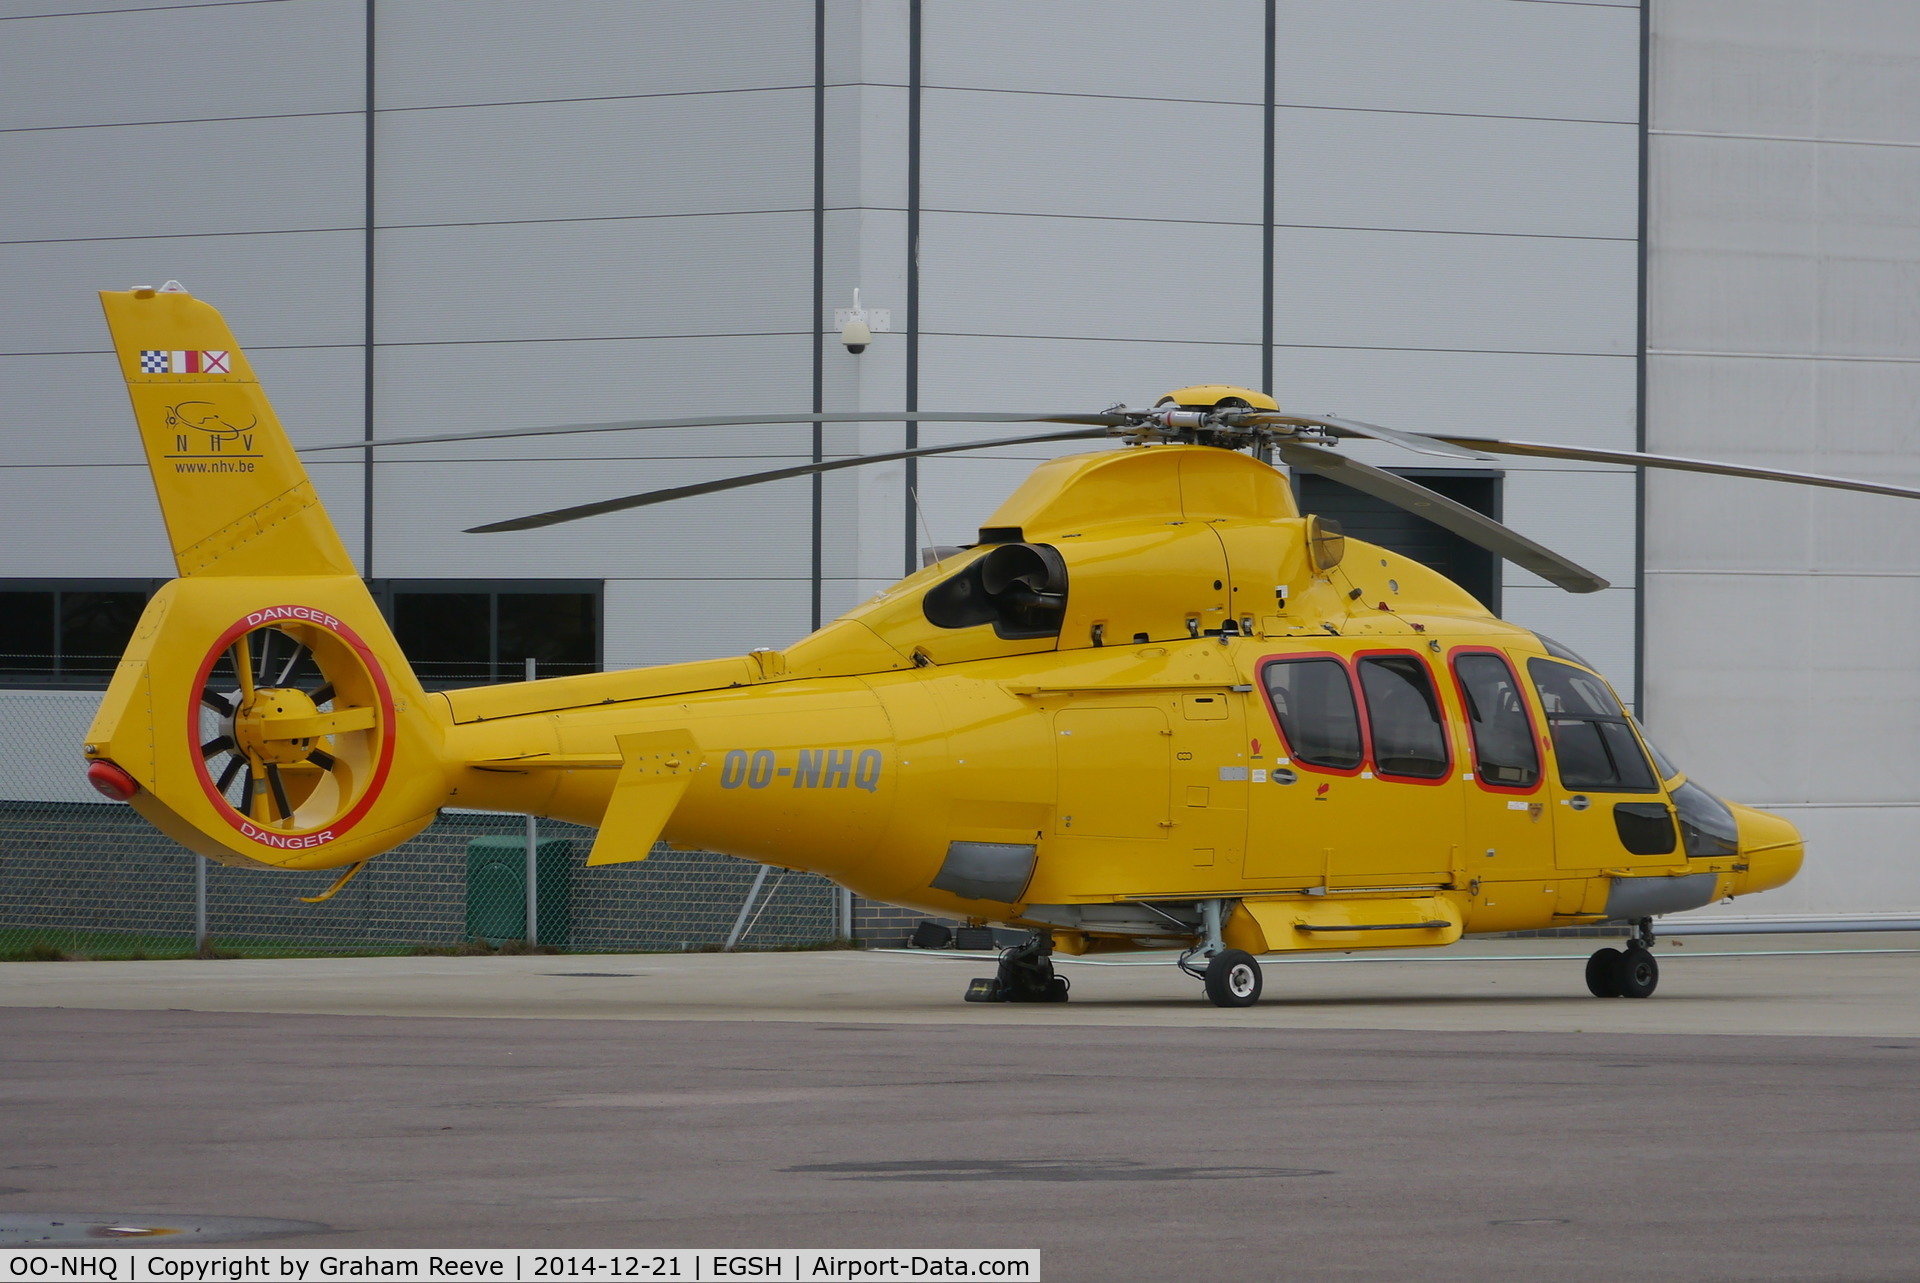 OO-NHQ, 2007 Eurocopter EC-155B-1 C/N 6778, Parked at Norwich.